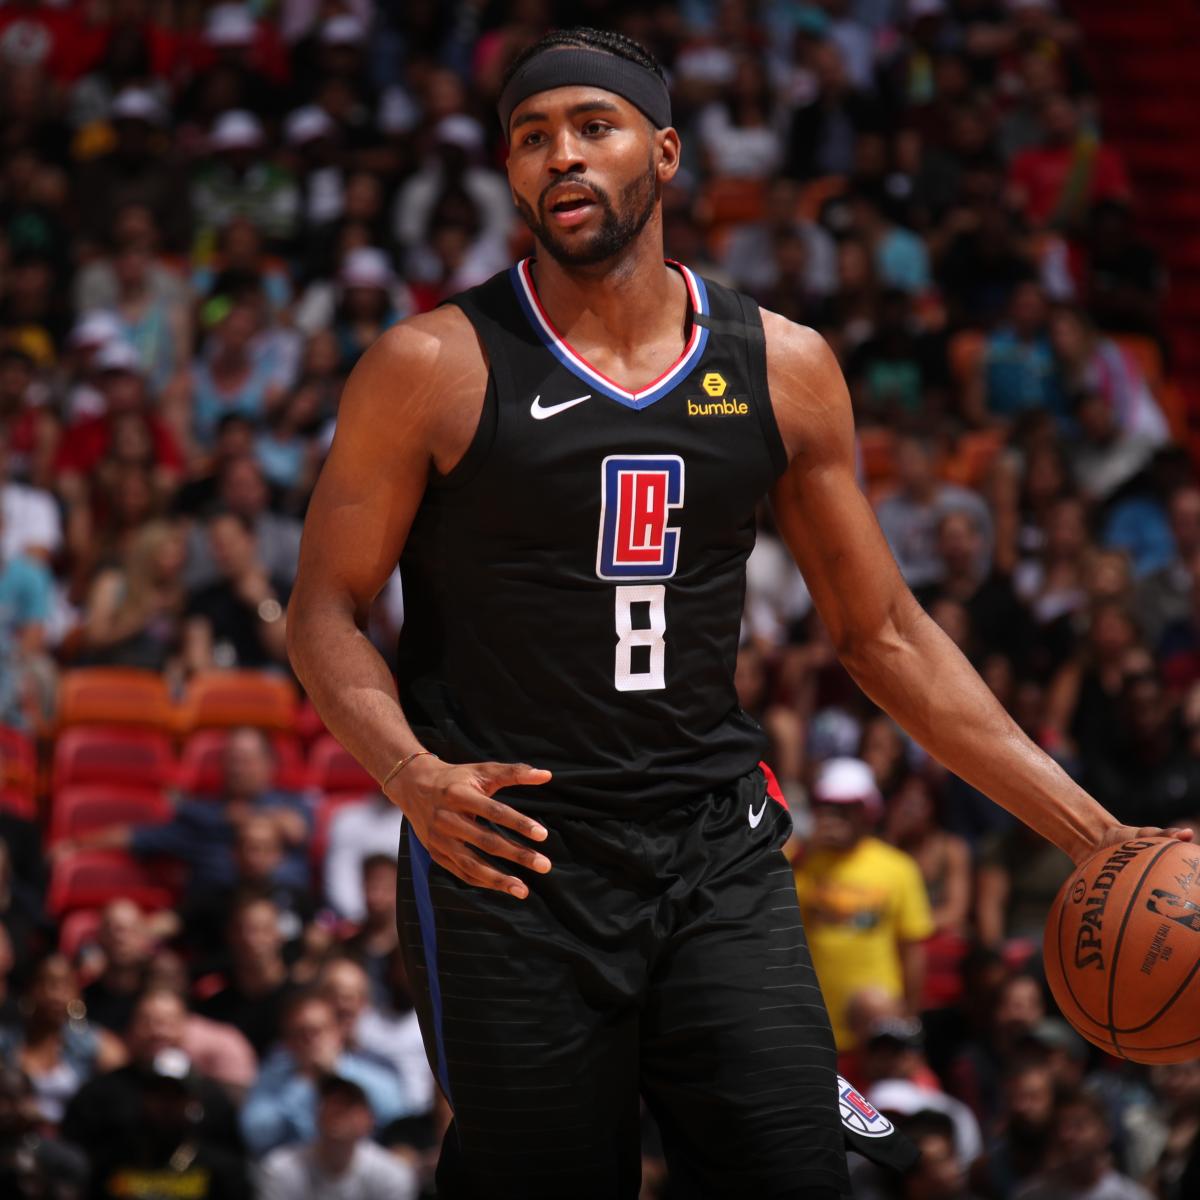 Clippers' Moe Harkless to Wear No. 11 Instead of No. 8 to Honor